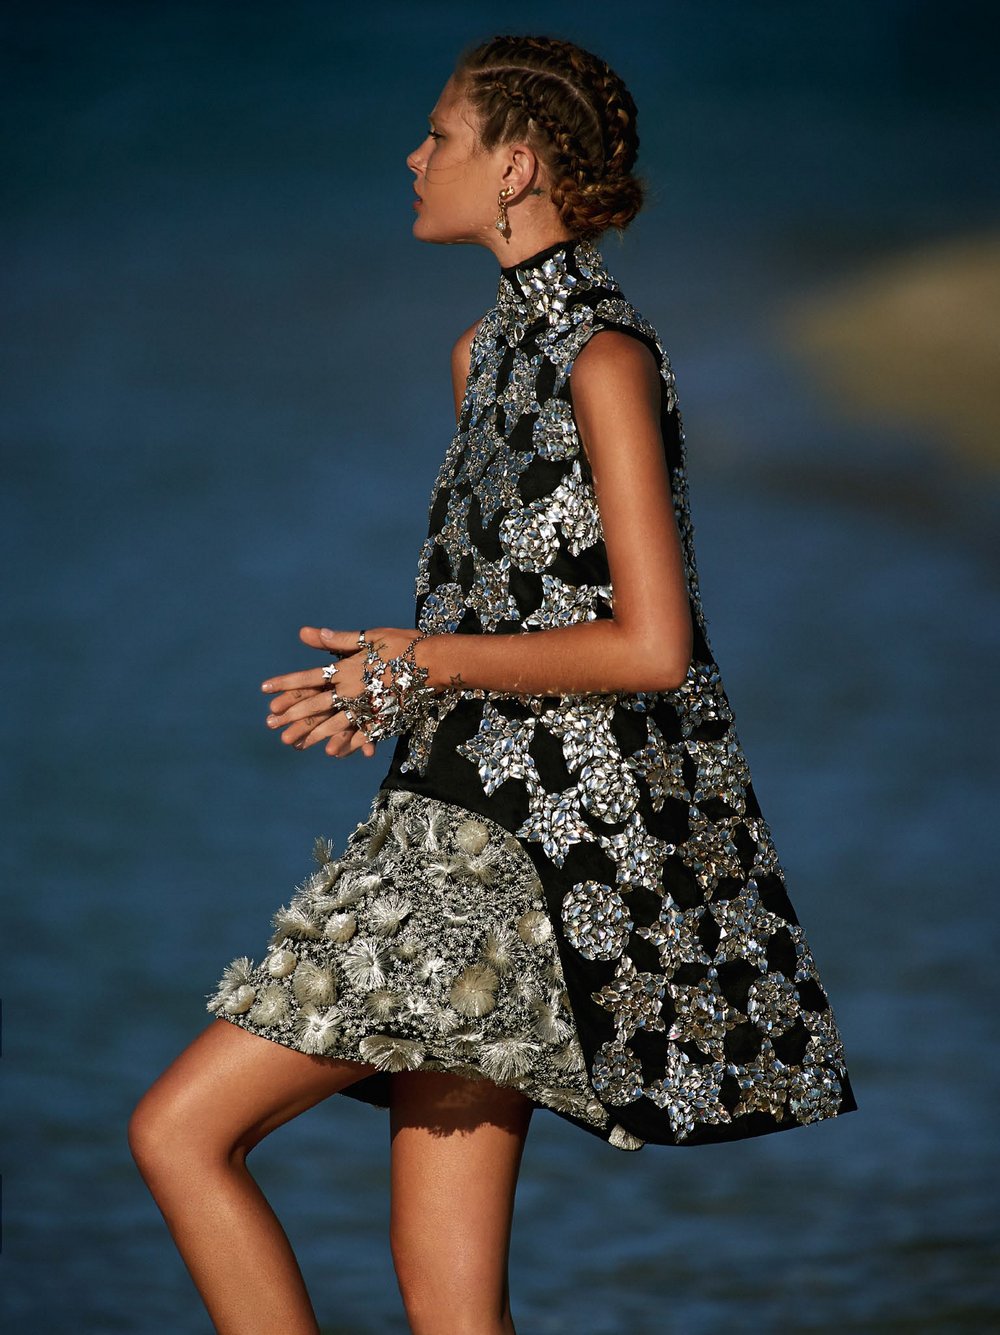 Catherine-McNeil-by-Gilles-Bensimon-for-Vogue-Australia-October-2014-1